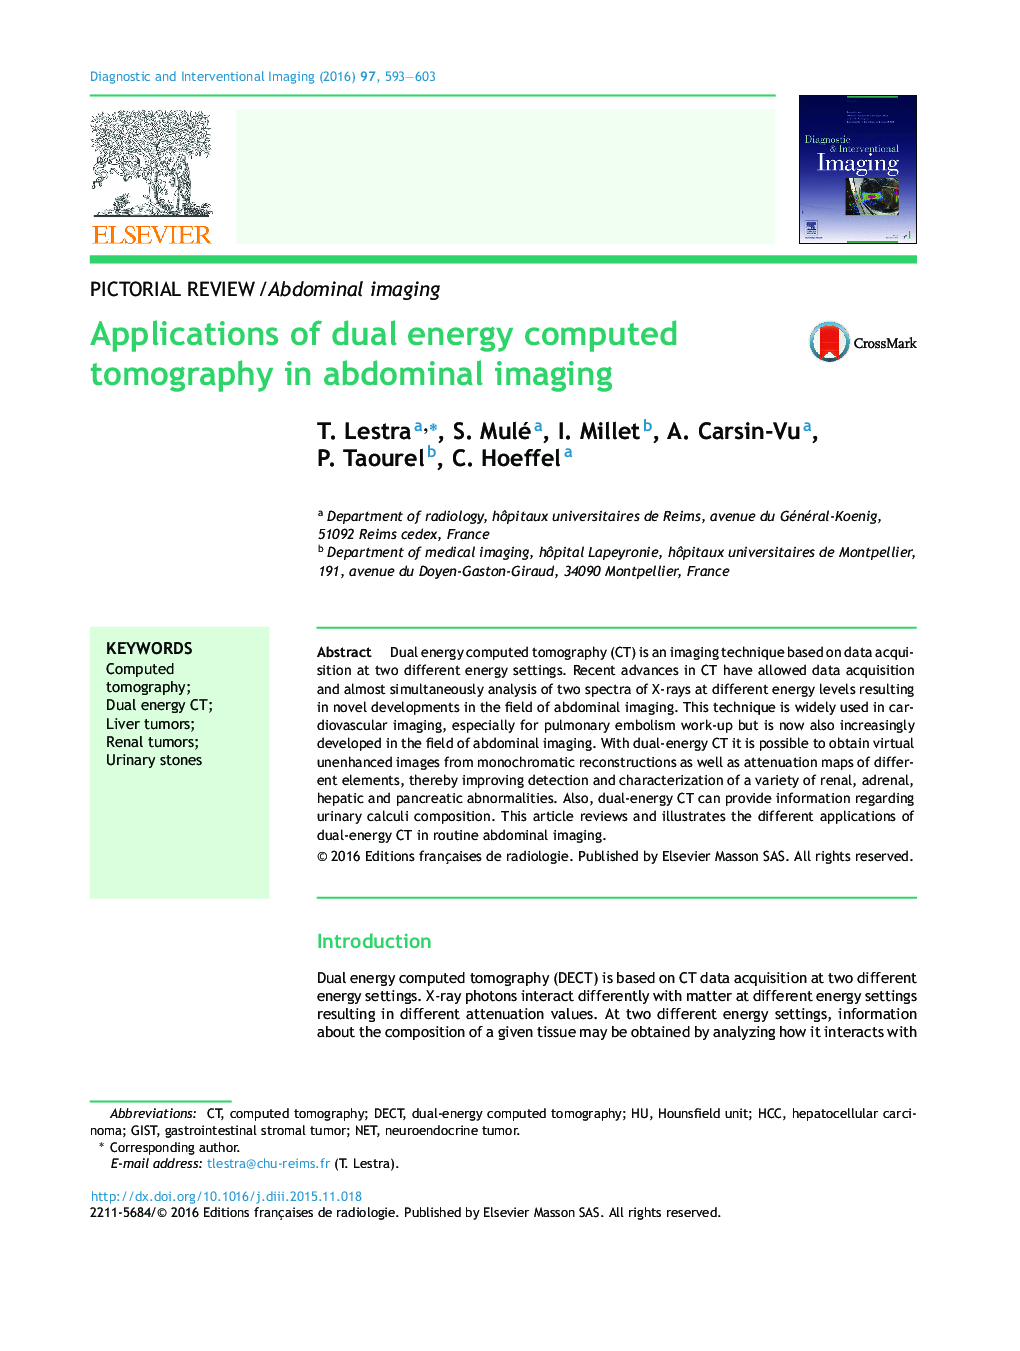 Applications of dual energy computed tomography in abdominal imaging